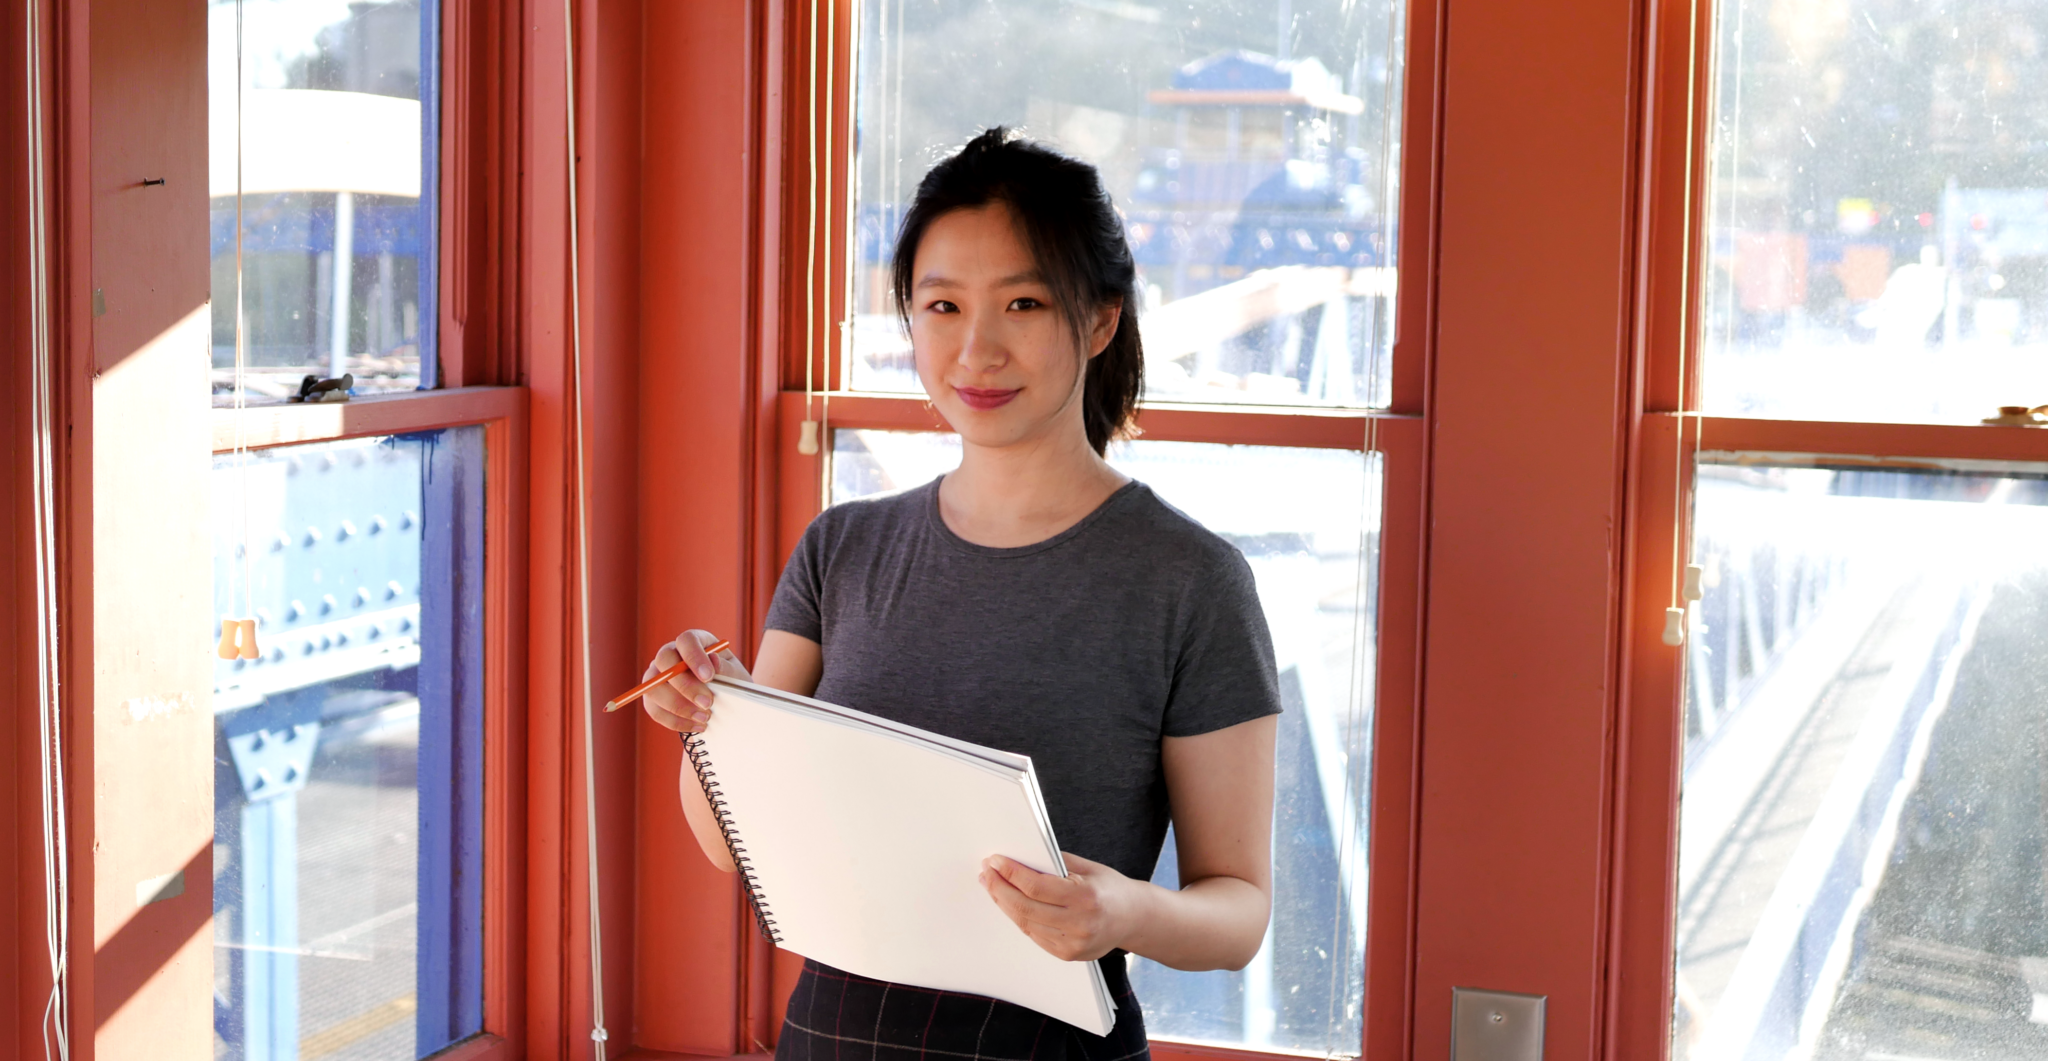 A person with brown eyes and brown hair pulled back in a ponytail wears a grey t-shirt and holds a drawing pad and pencil. There are burnt orange colored window frames around them and a blue bridge in the background behind them.